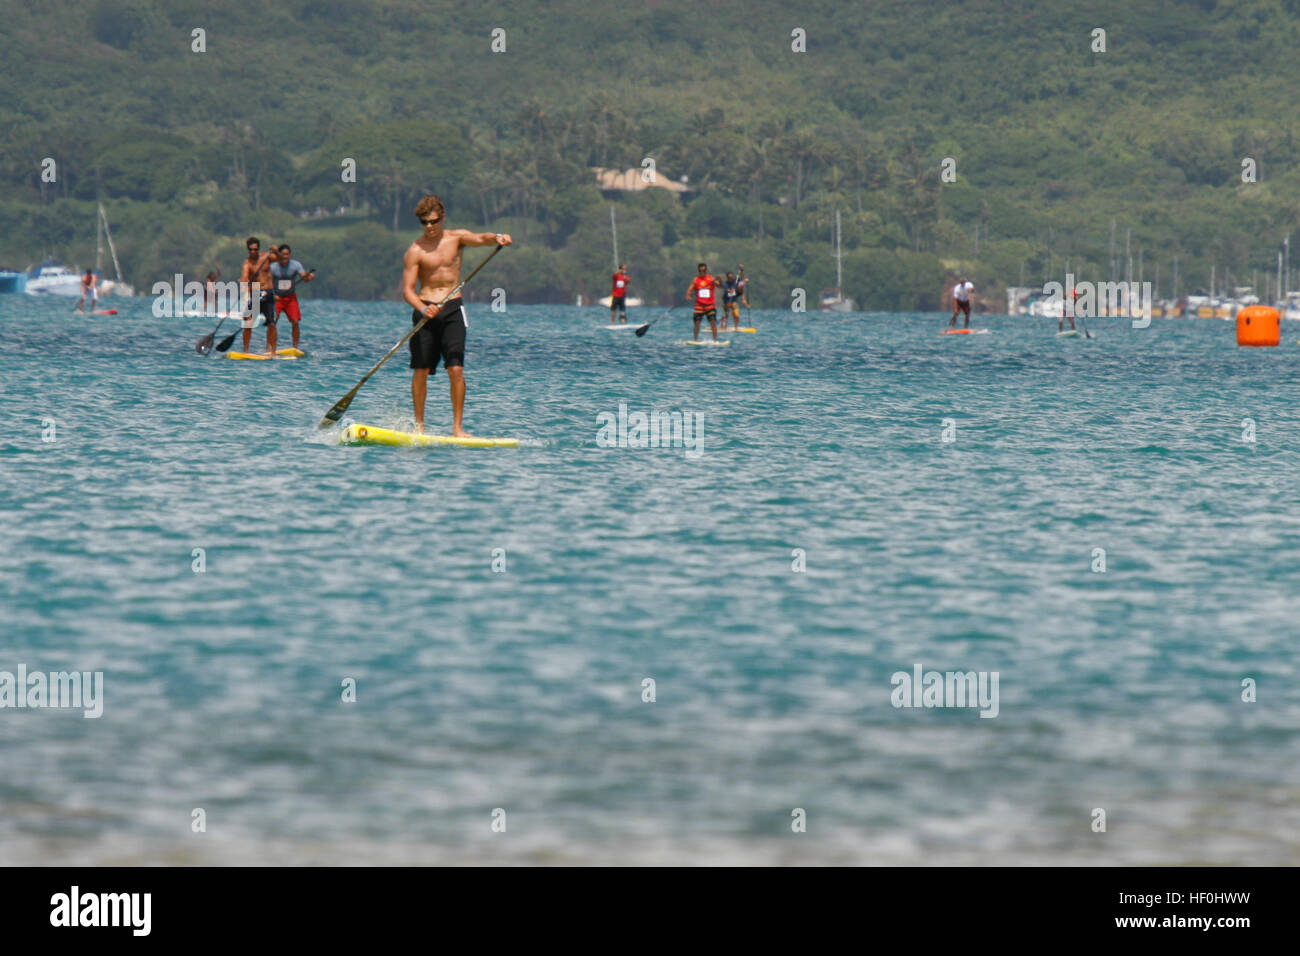 Stand up paddle boarders participate in Marine Corps Air Station Kaneohe Bay’s first stand up Paddling Race in Oahu’s Kaneohe Bay during Bayfest 2011, July 16. Forty-five military members, family members, and civilians participated in the four mile race near MCAS Kaneohe Bay’s shore. Bayfest 2011 110716-M-DX861-048 Stock Photo